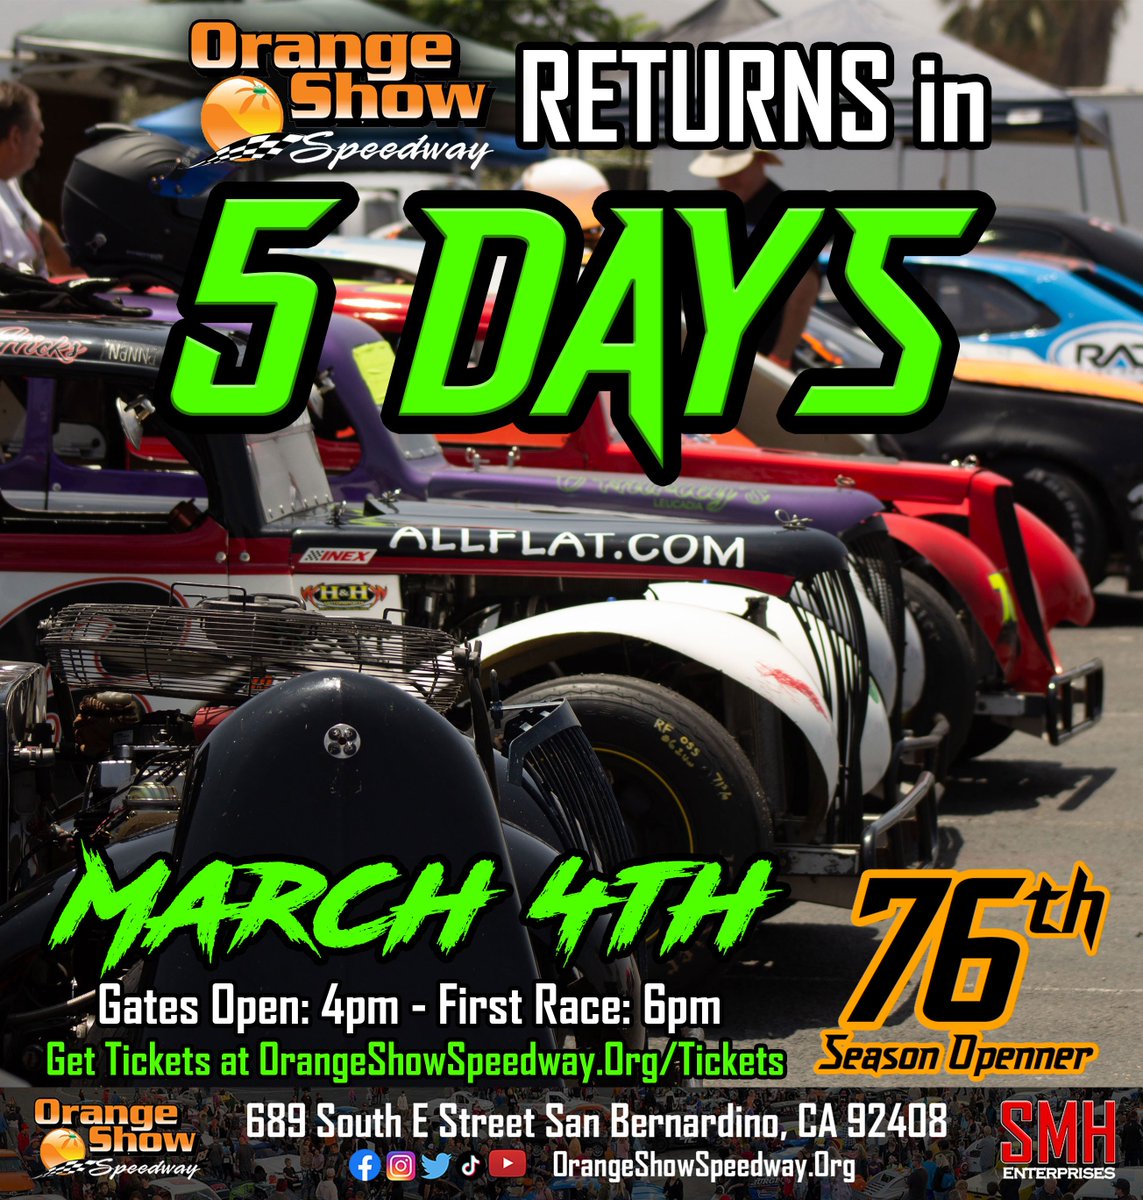 Bandos & Legends are back in 2023! 

Get Tickets now: OrangeShowSpeedway.org/Tickets

#OrangeShowSpeedway #sanbernardino #noscenter #route66 #nascar #nascar75 #socal #motorsports #race #racing #AutoClubSpeedway #shorttrack #speedway #hotpitautofest #hotpit #streetstock #latemodel